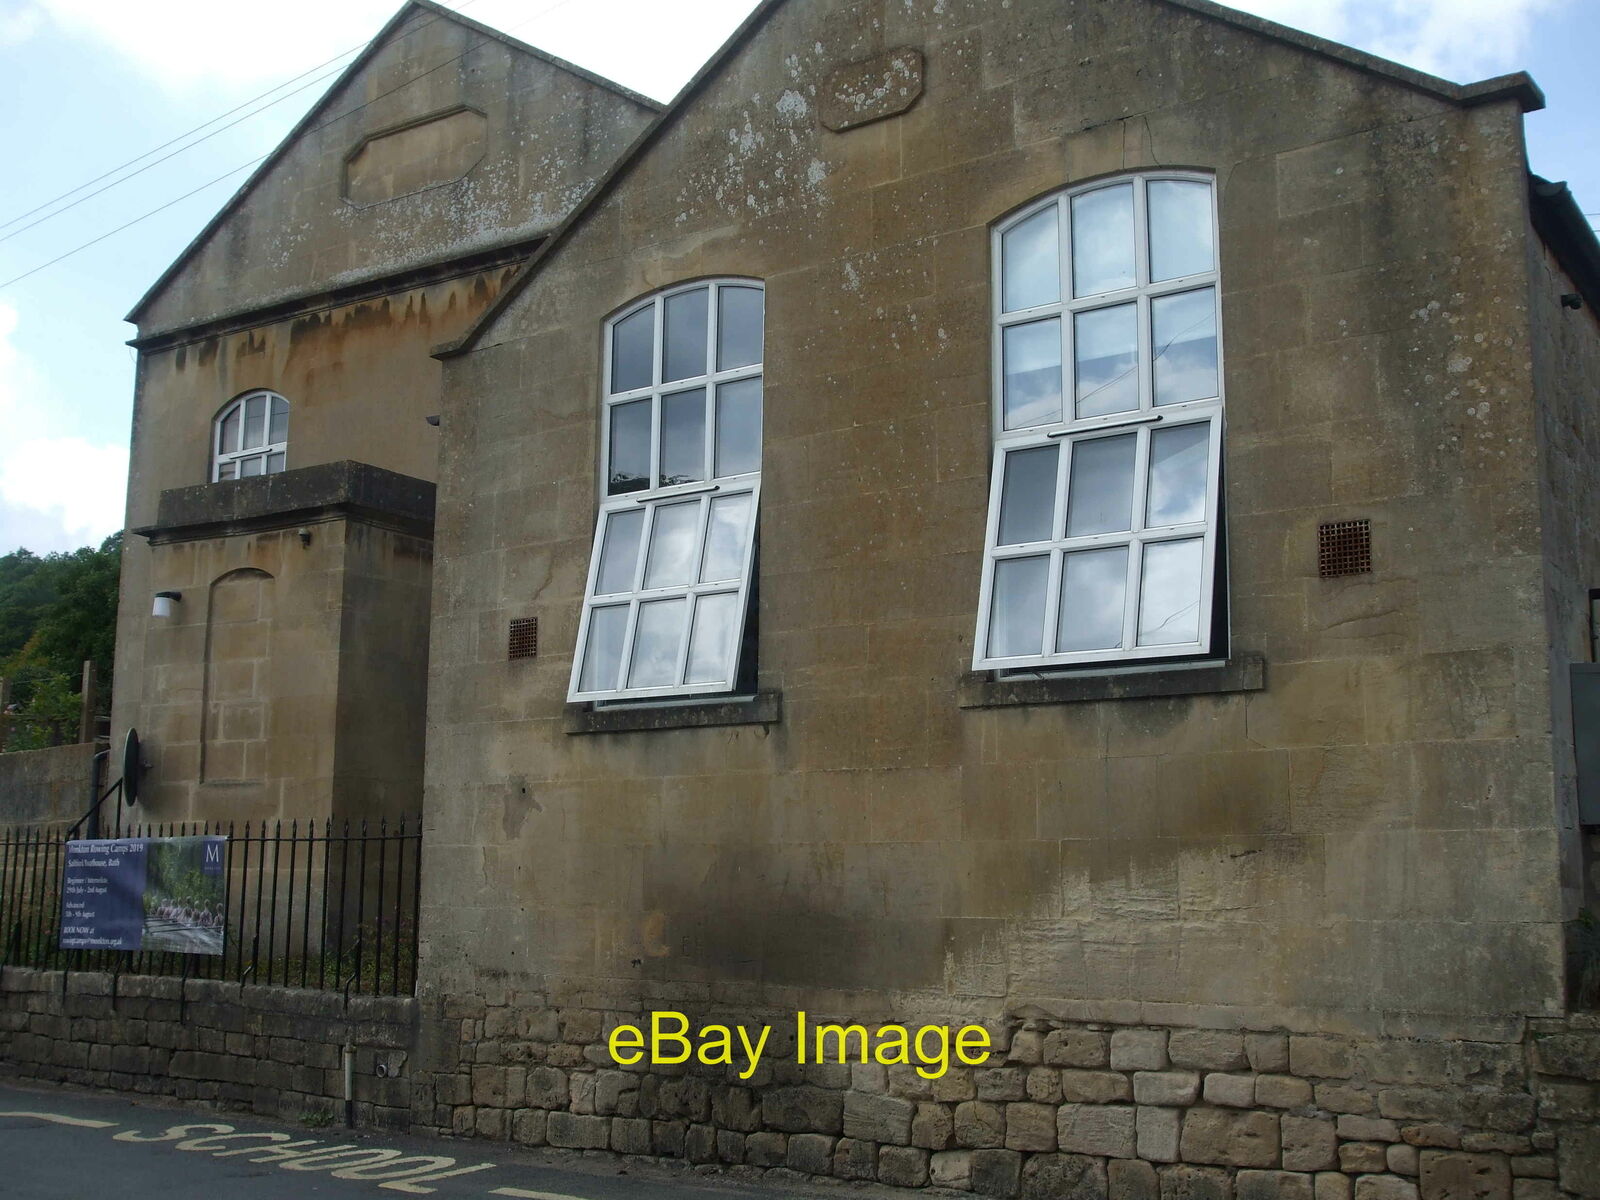 Photo 6x4 An older school in Monkton Combe The village is very much assoc c2019